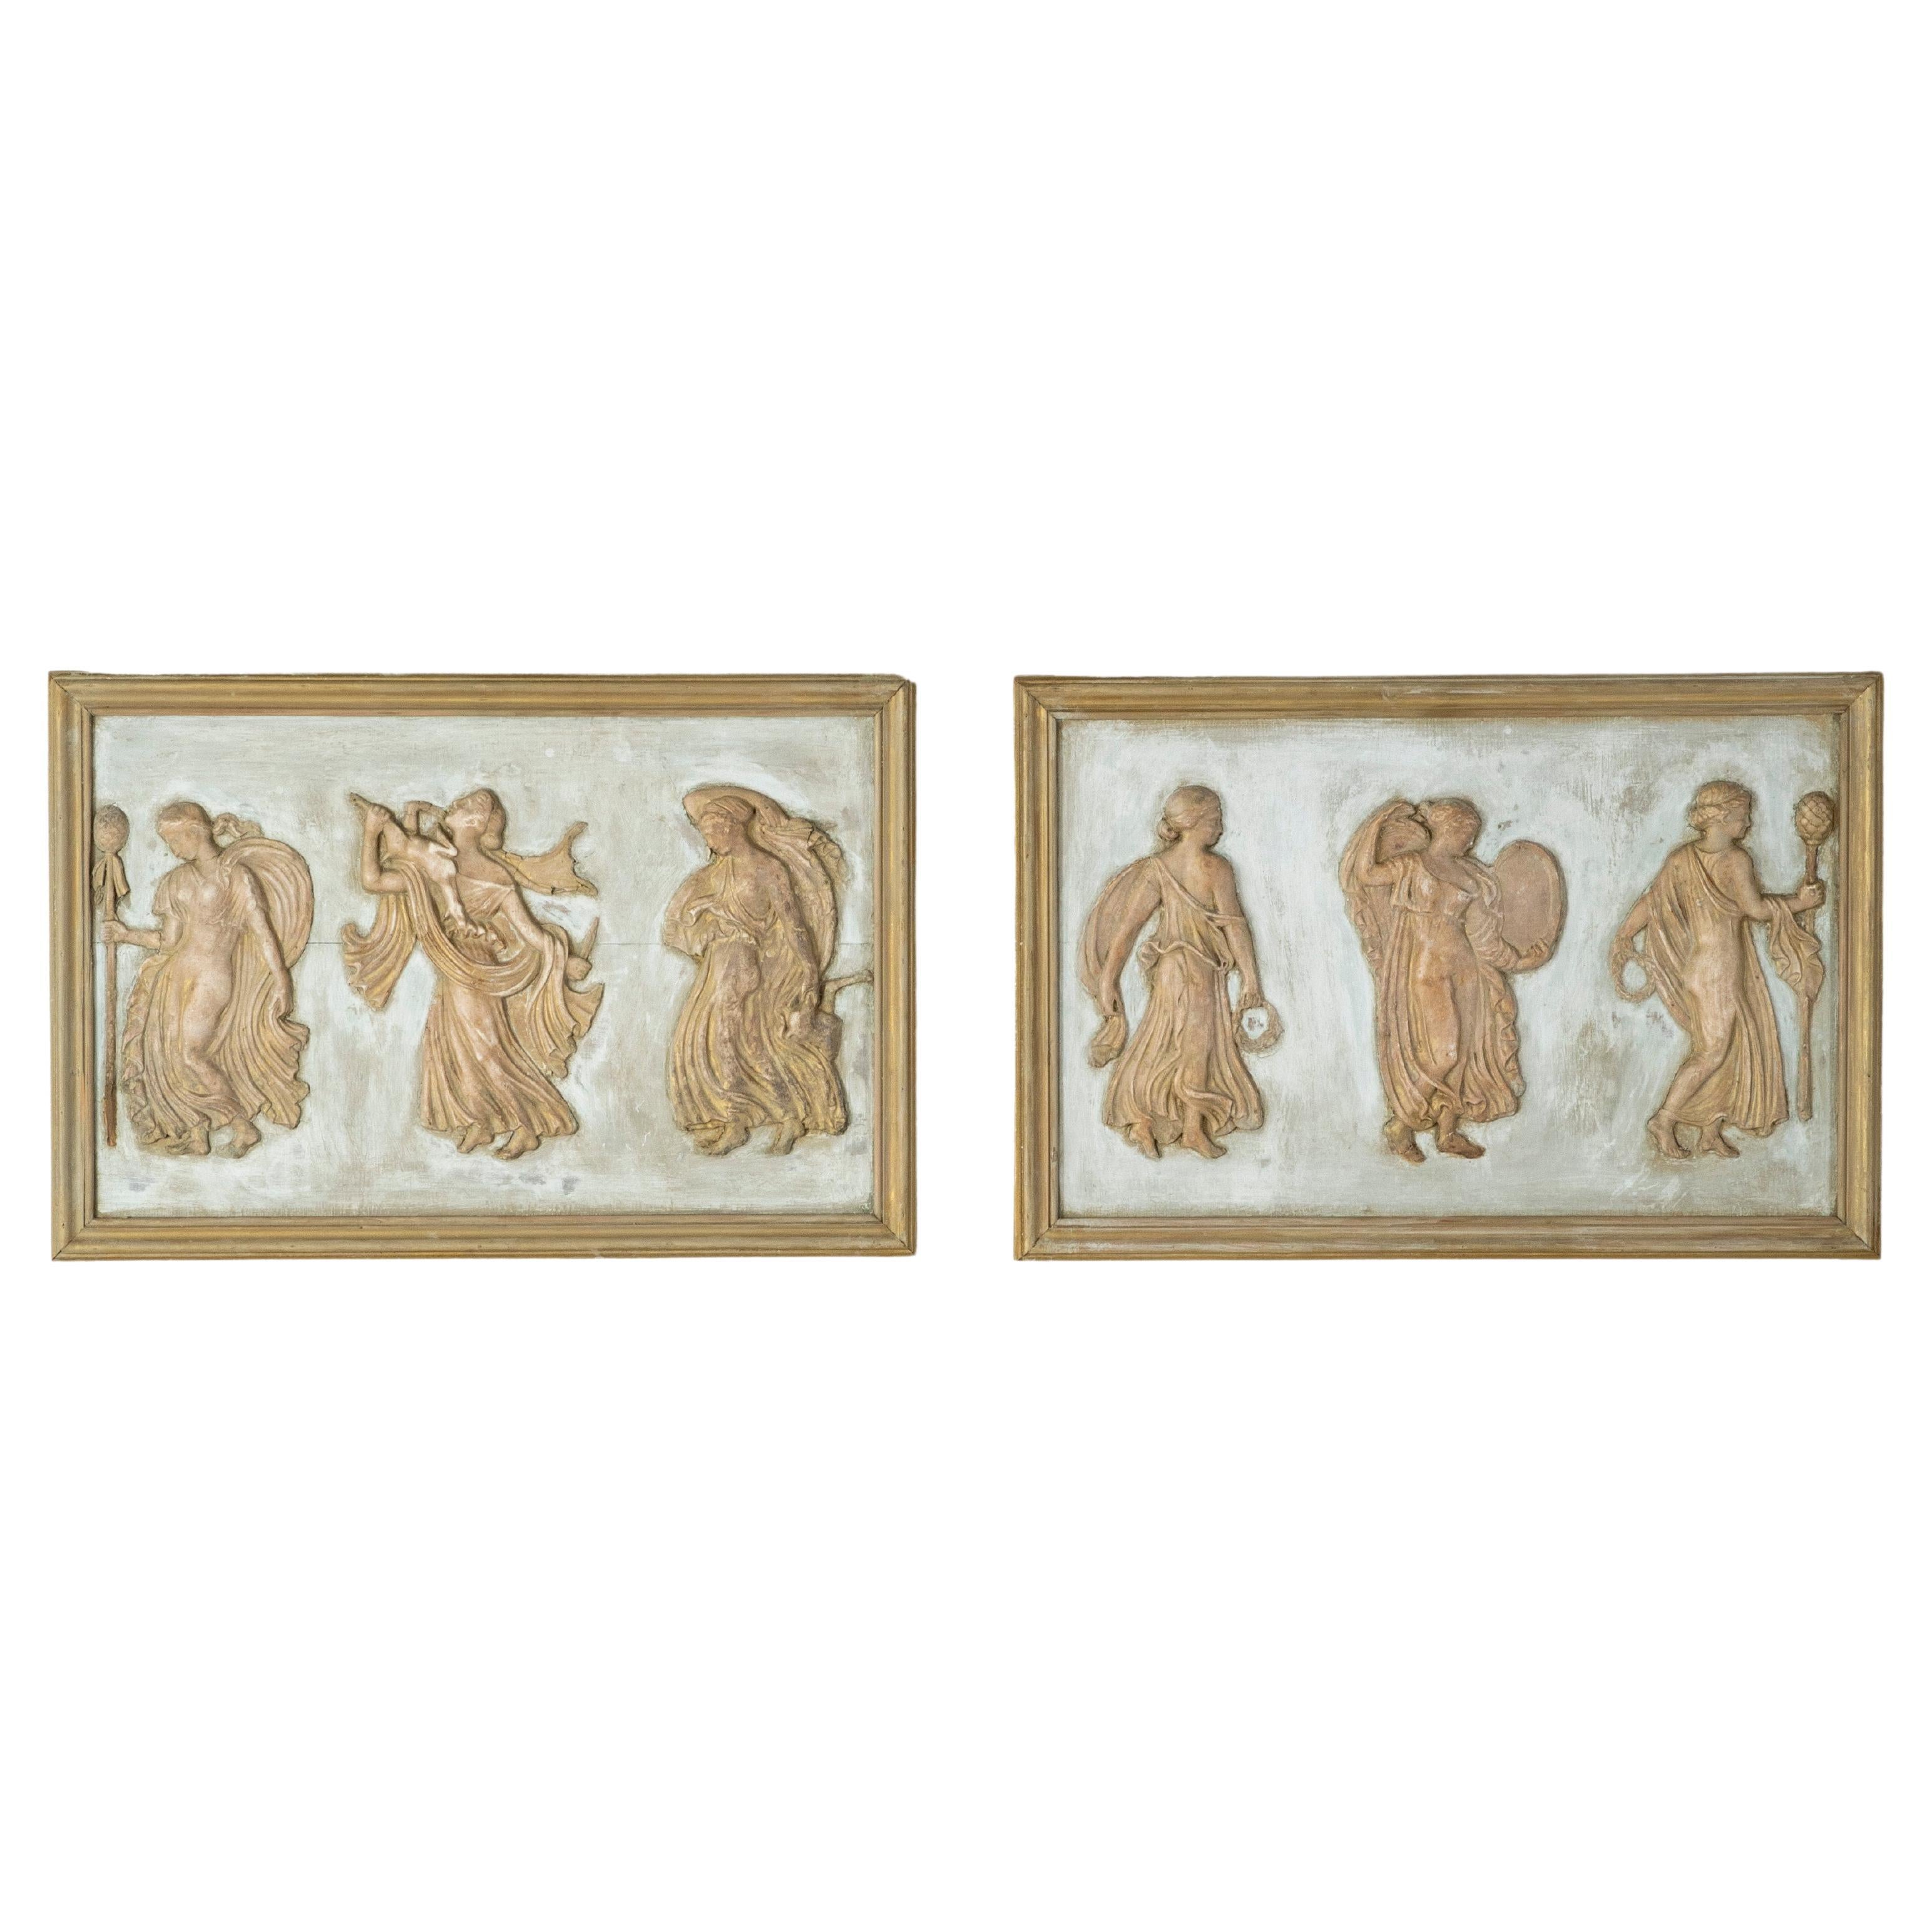 Pair of French Directoire Period Stucco Boiserie Panels